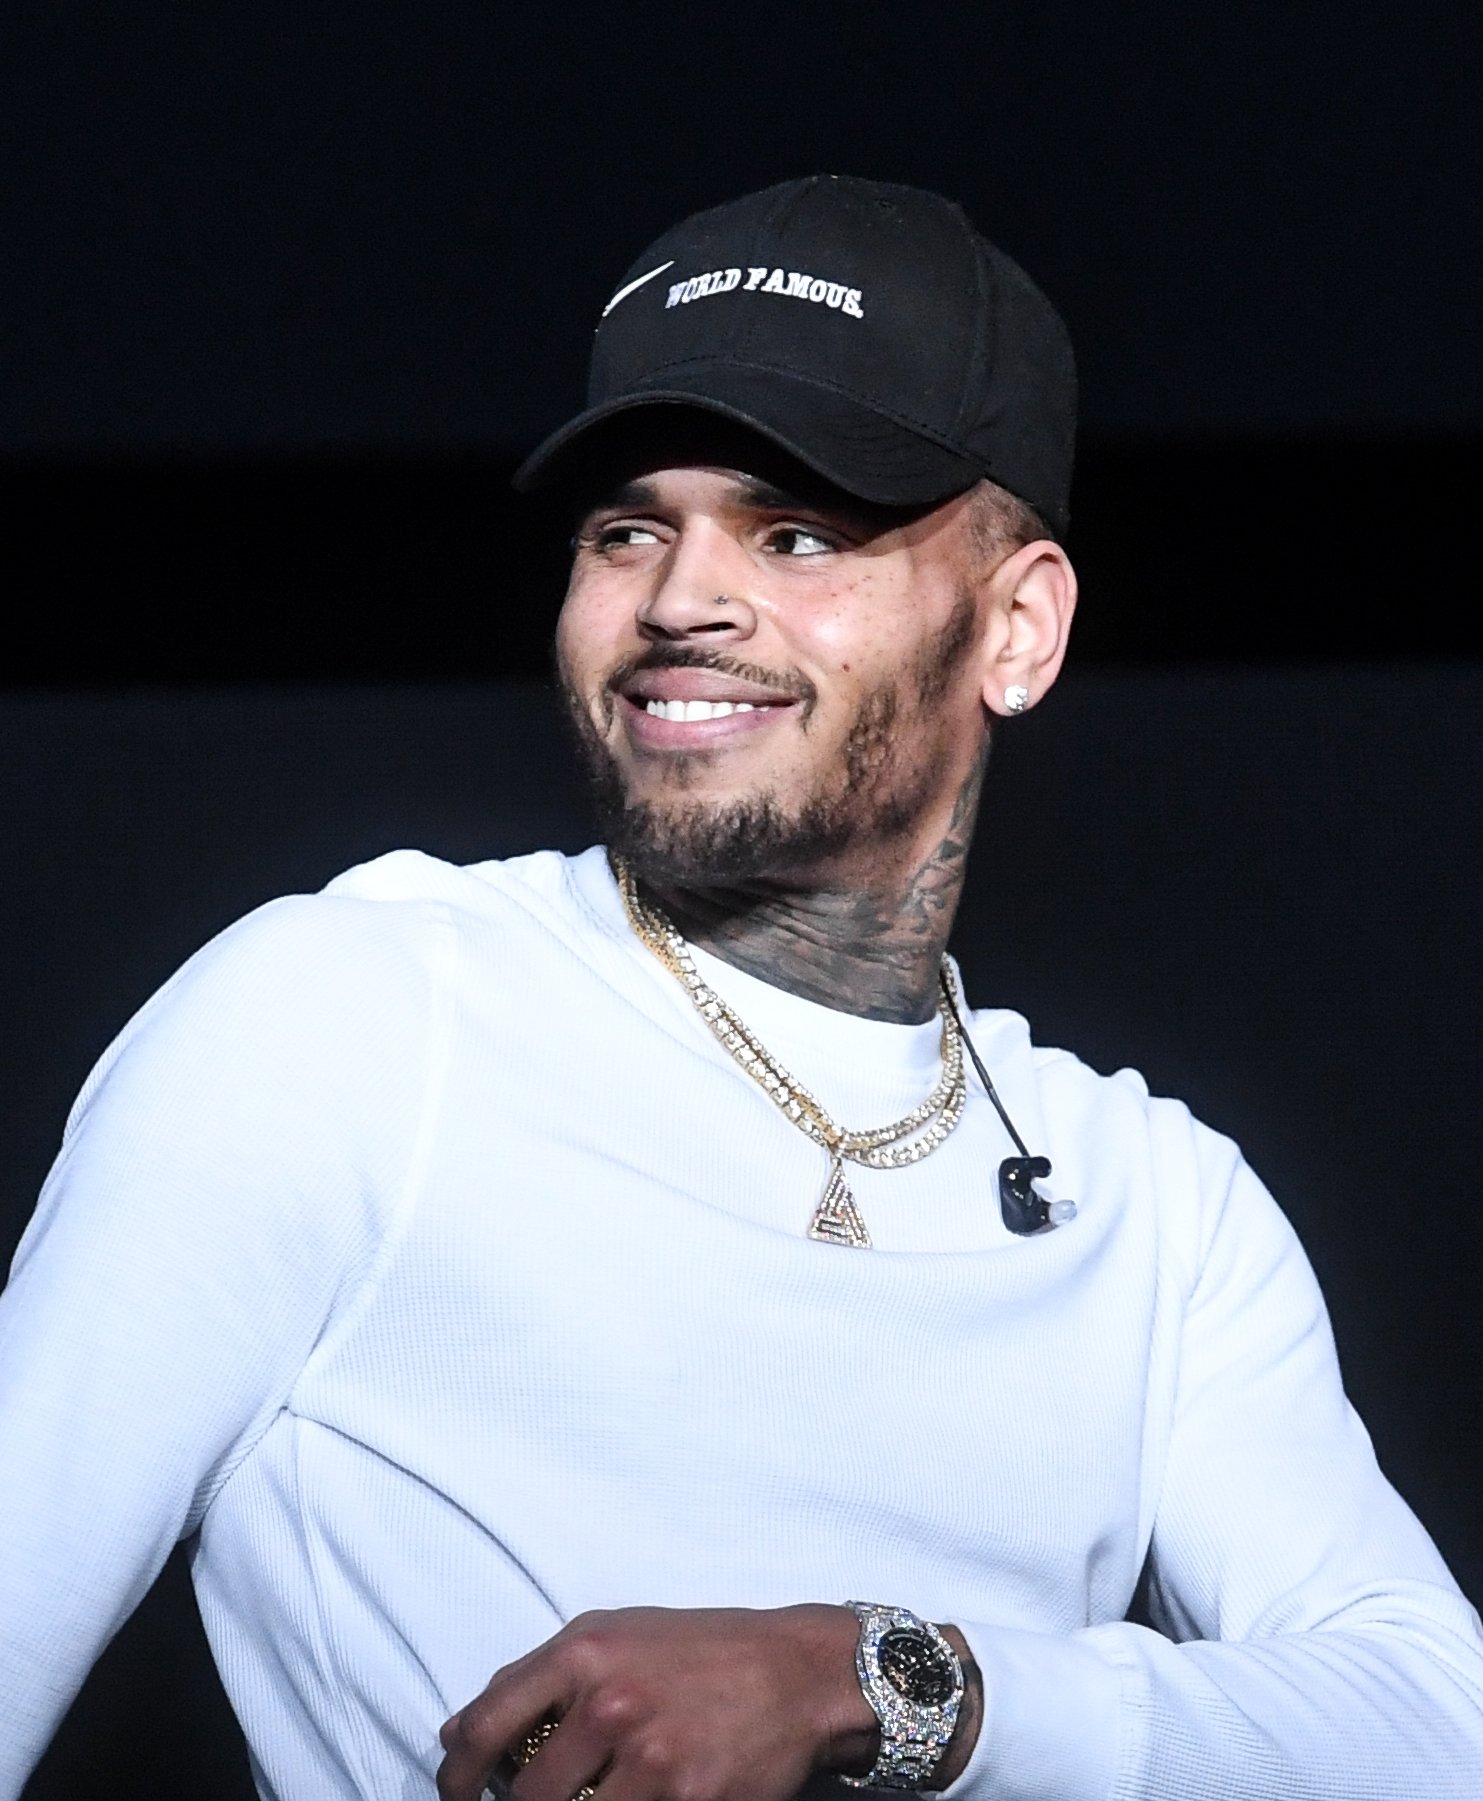 Chris Brown at the 3rd Annual V-103 Winterfest Concert on Dec. 16, 2017 in Atlanta, Georgia | Photo: Getty Images